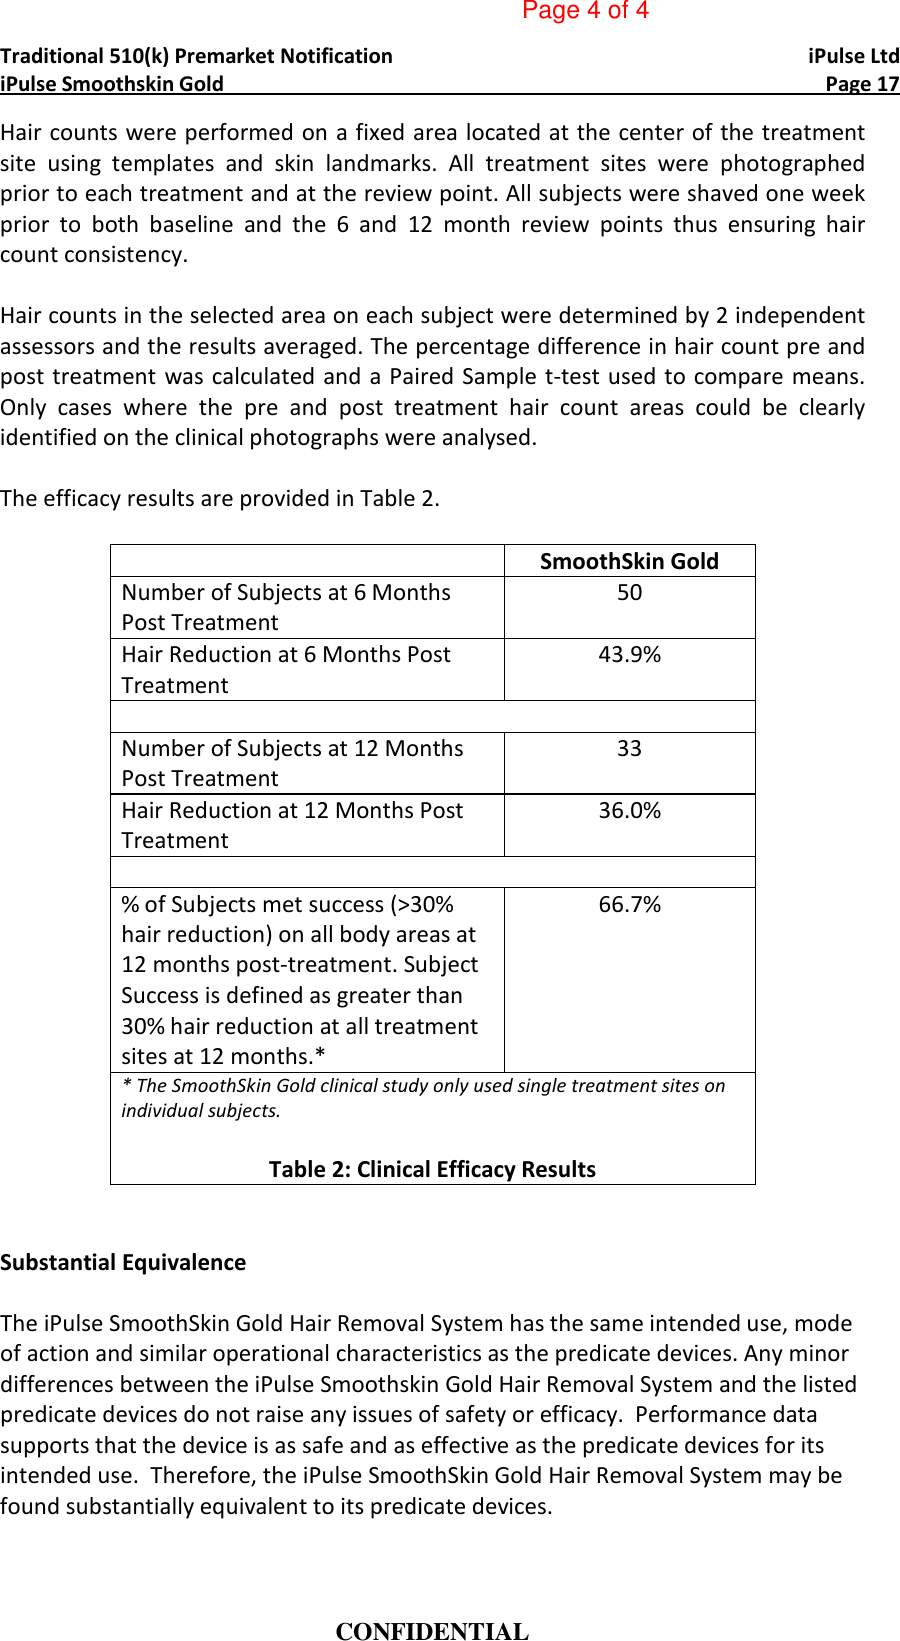 Page 7 of 7 - ORIGINAL [510(K)] PREMARKET NOTIFICATION * Report K143003 - I Pulse Smooth Skin Gold Hair Removal System